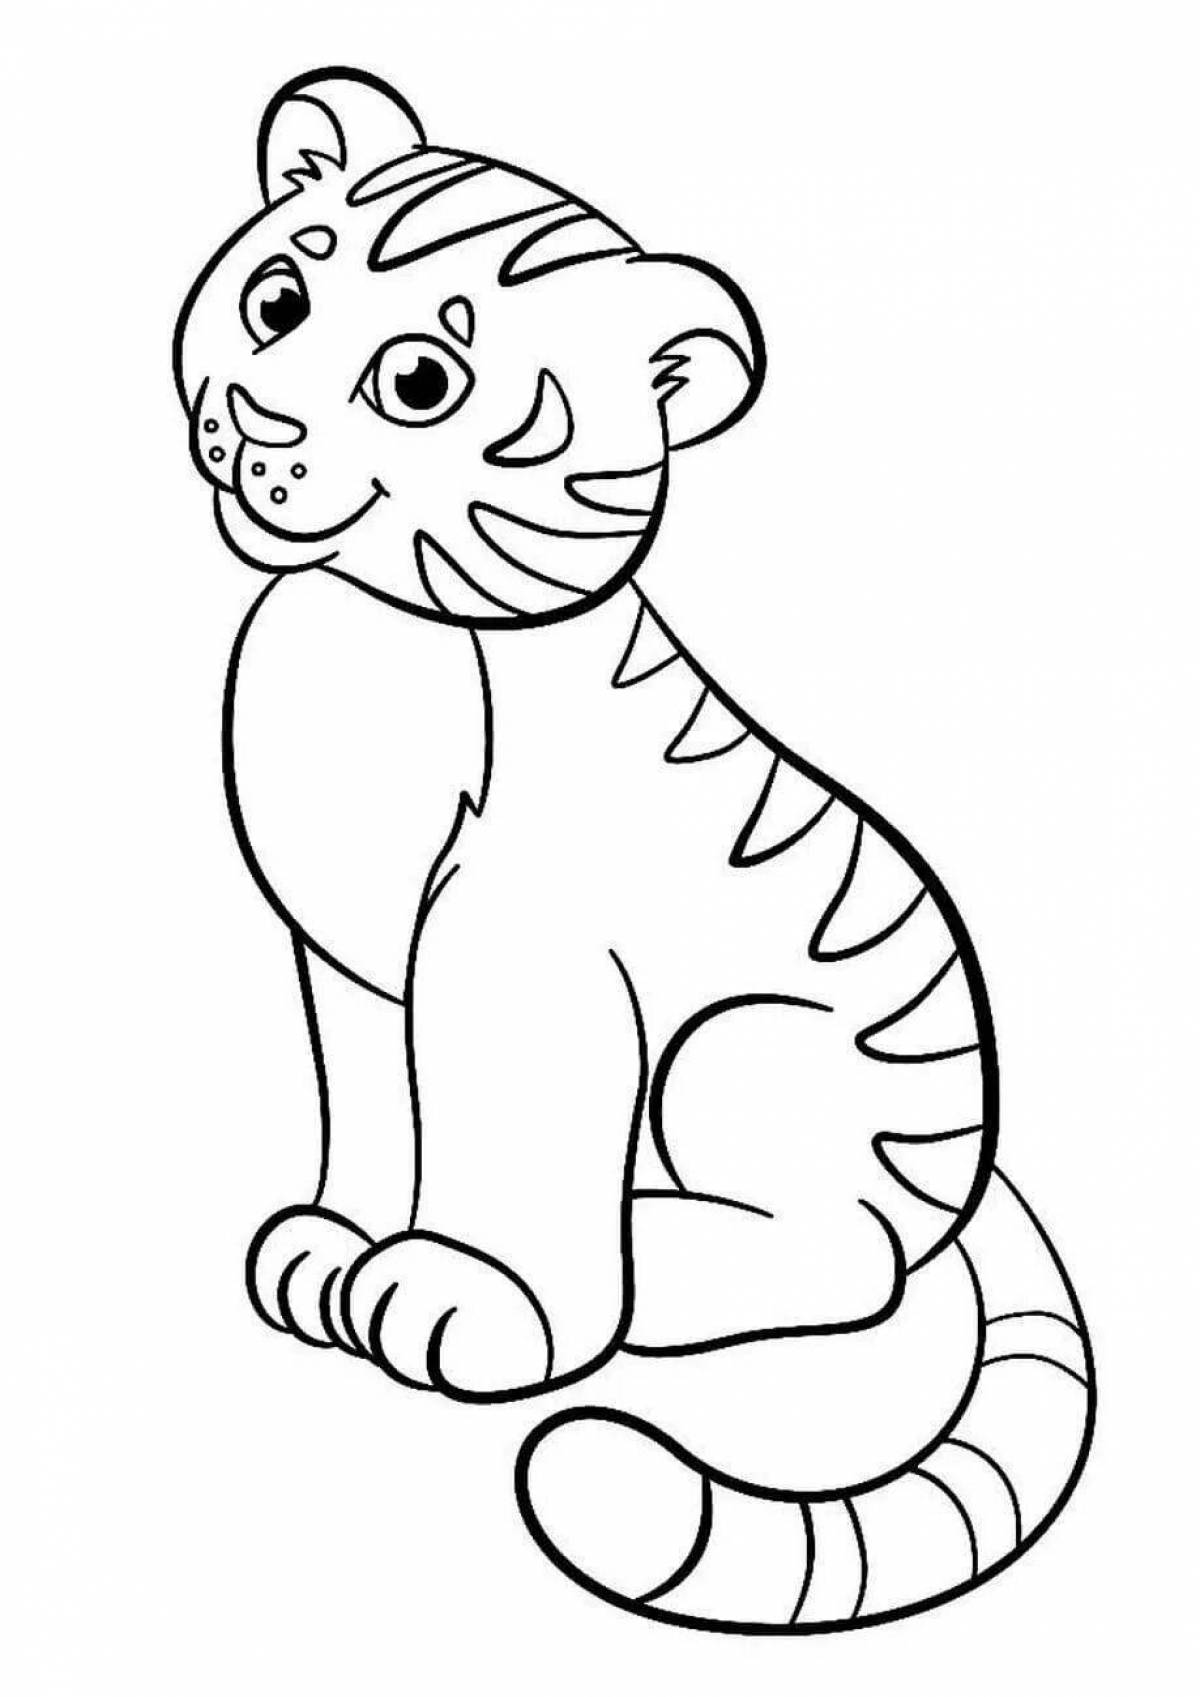 Shining coloring tiger without stripes